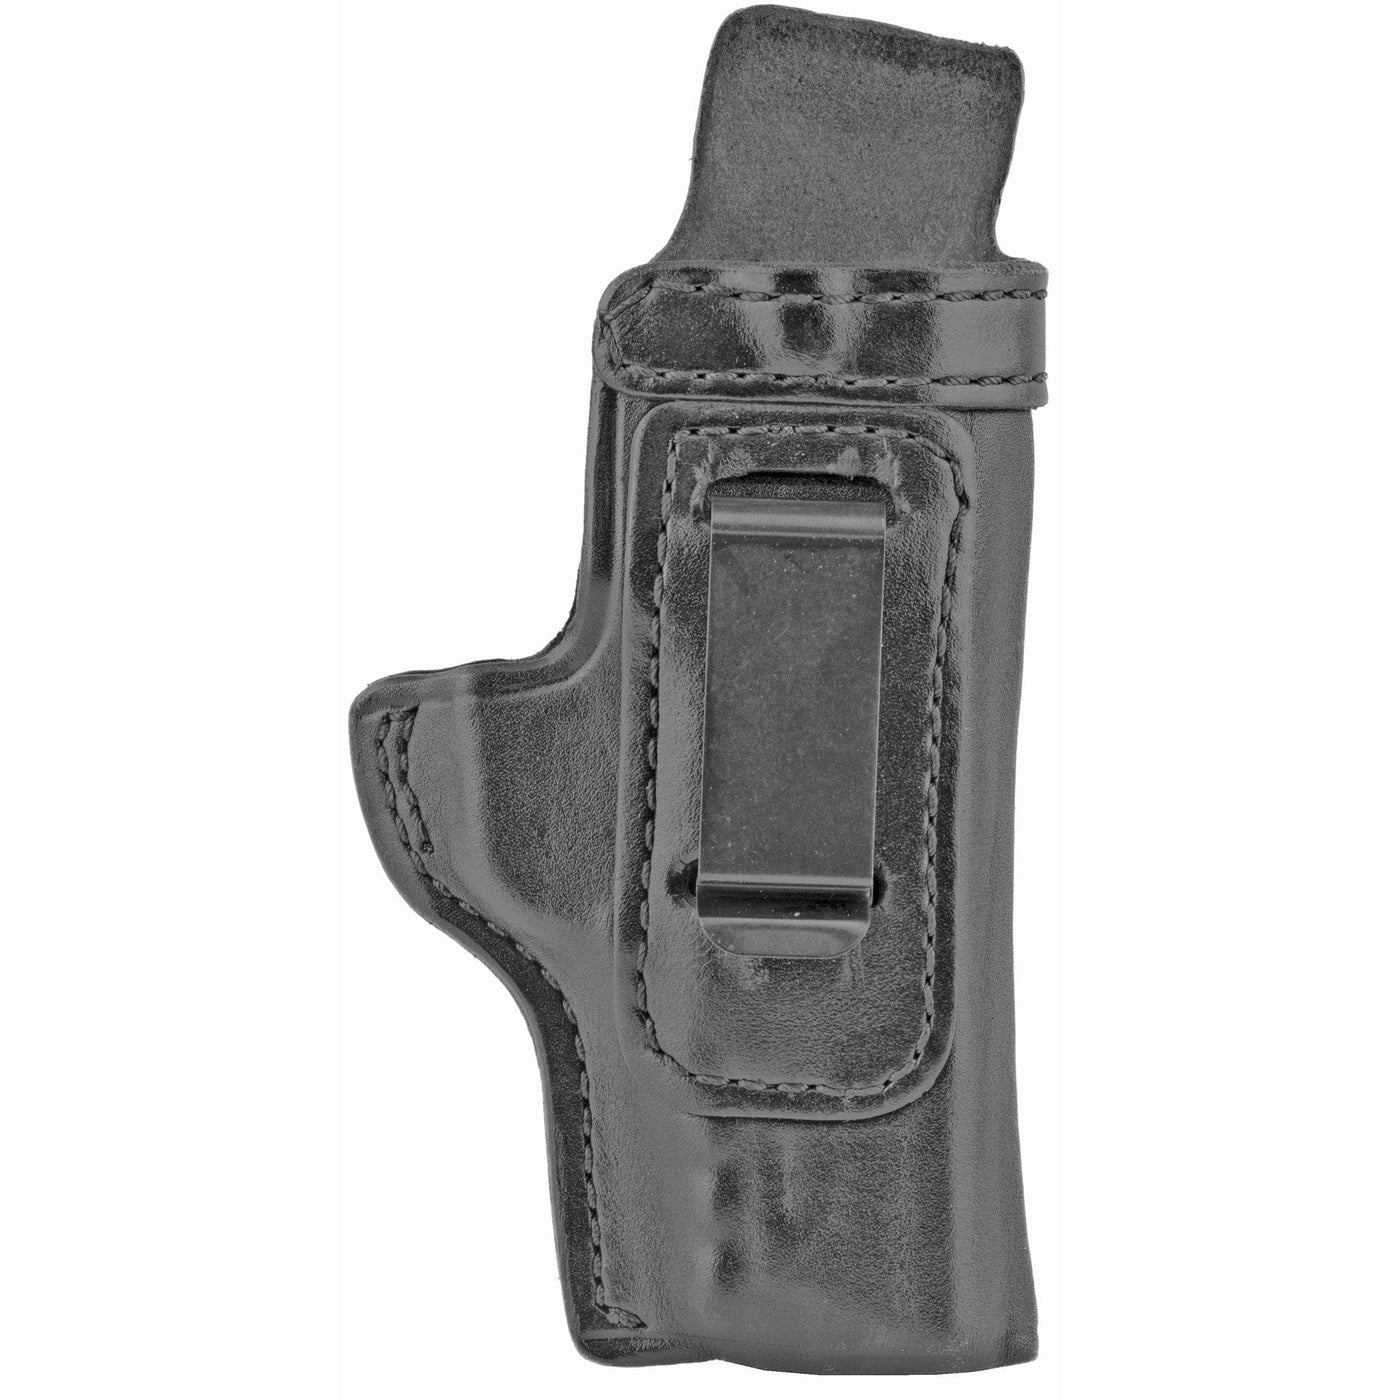 Don Hume D Hume H715m Wcs Sw Mp9 Shldez Rh Holsters